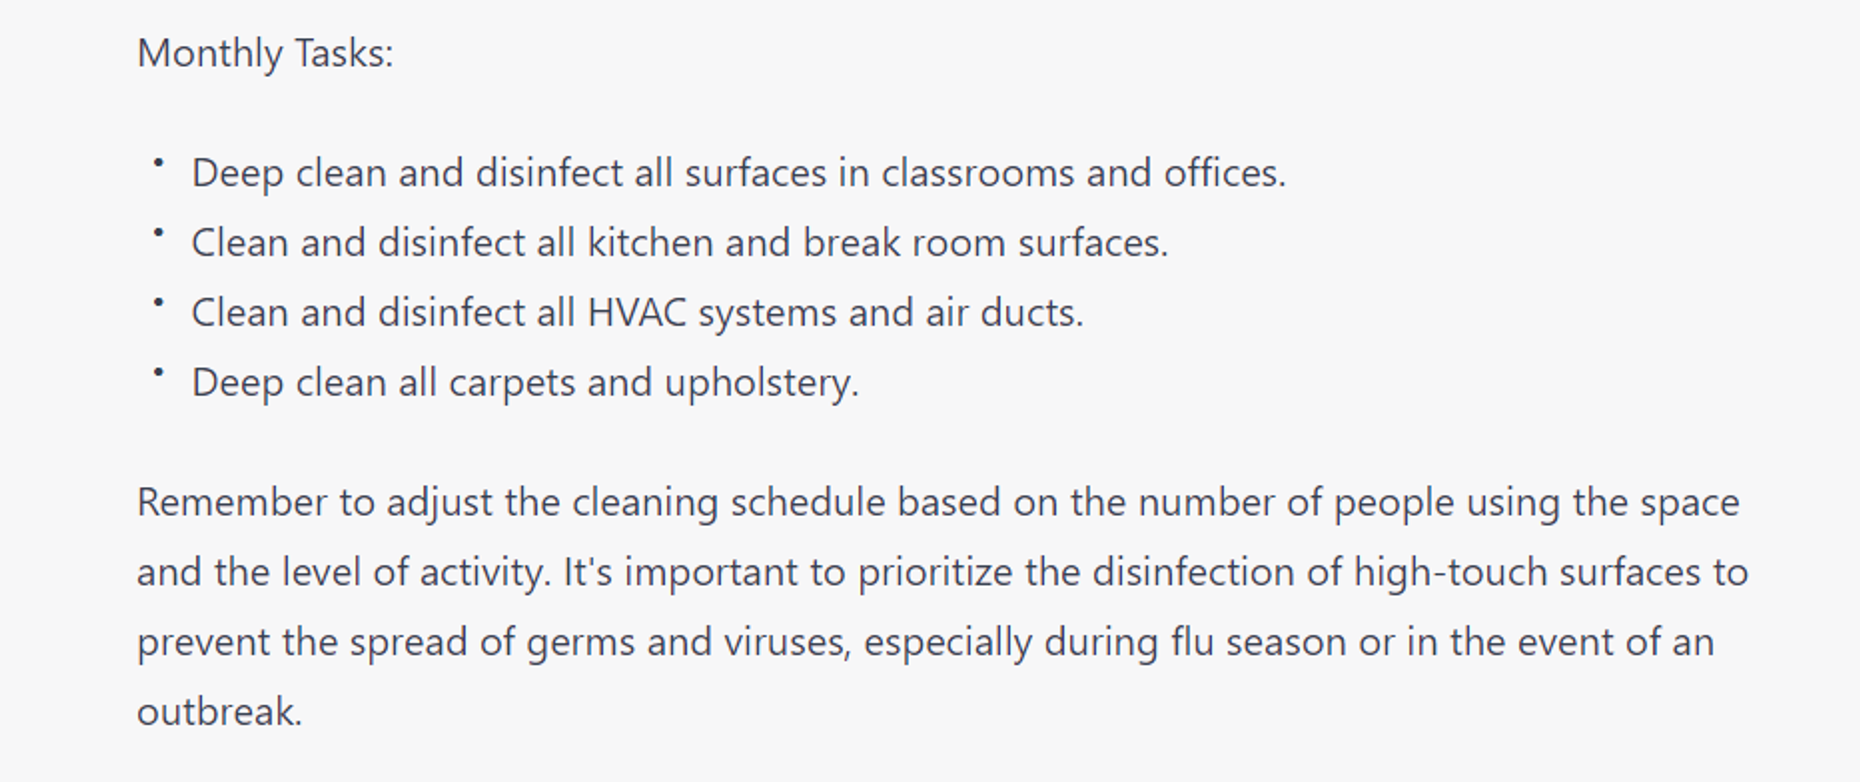  7 Proven ChatGPT Prompts: Provide cleaning schedules